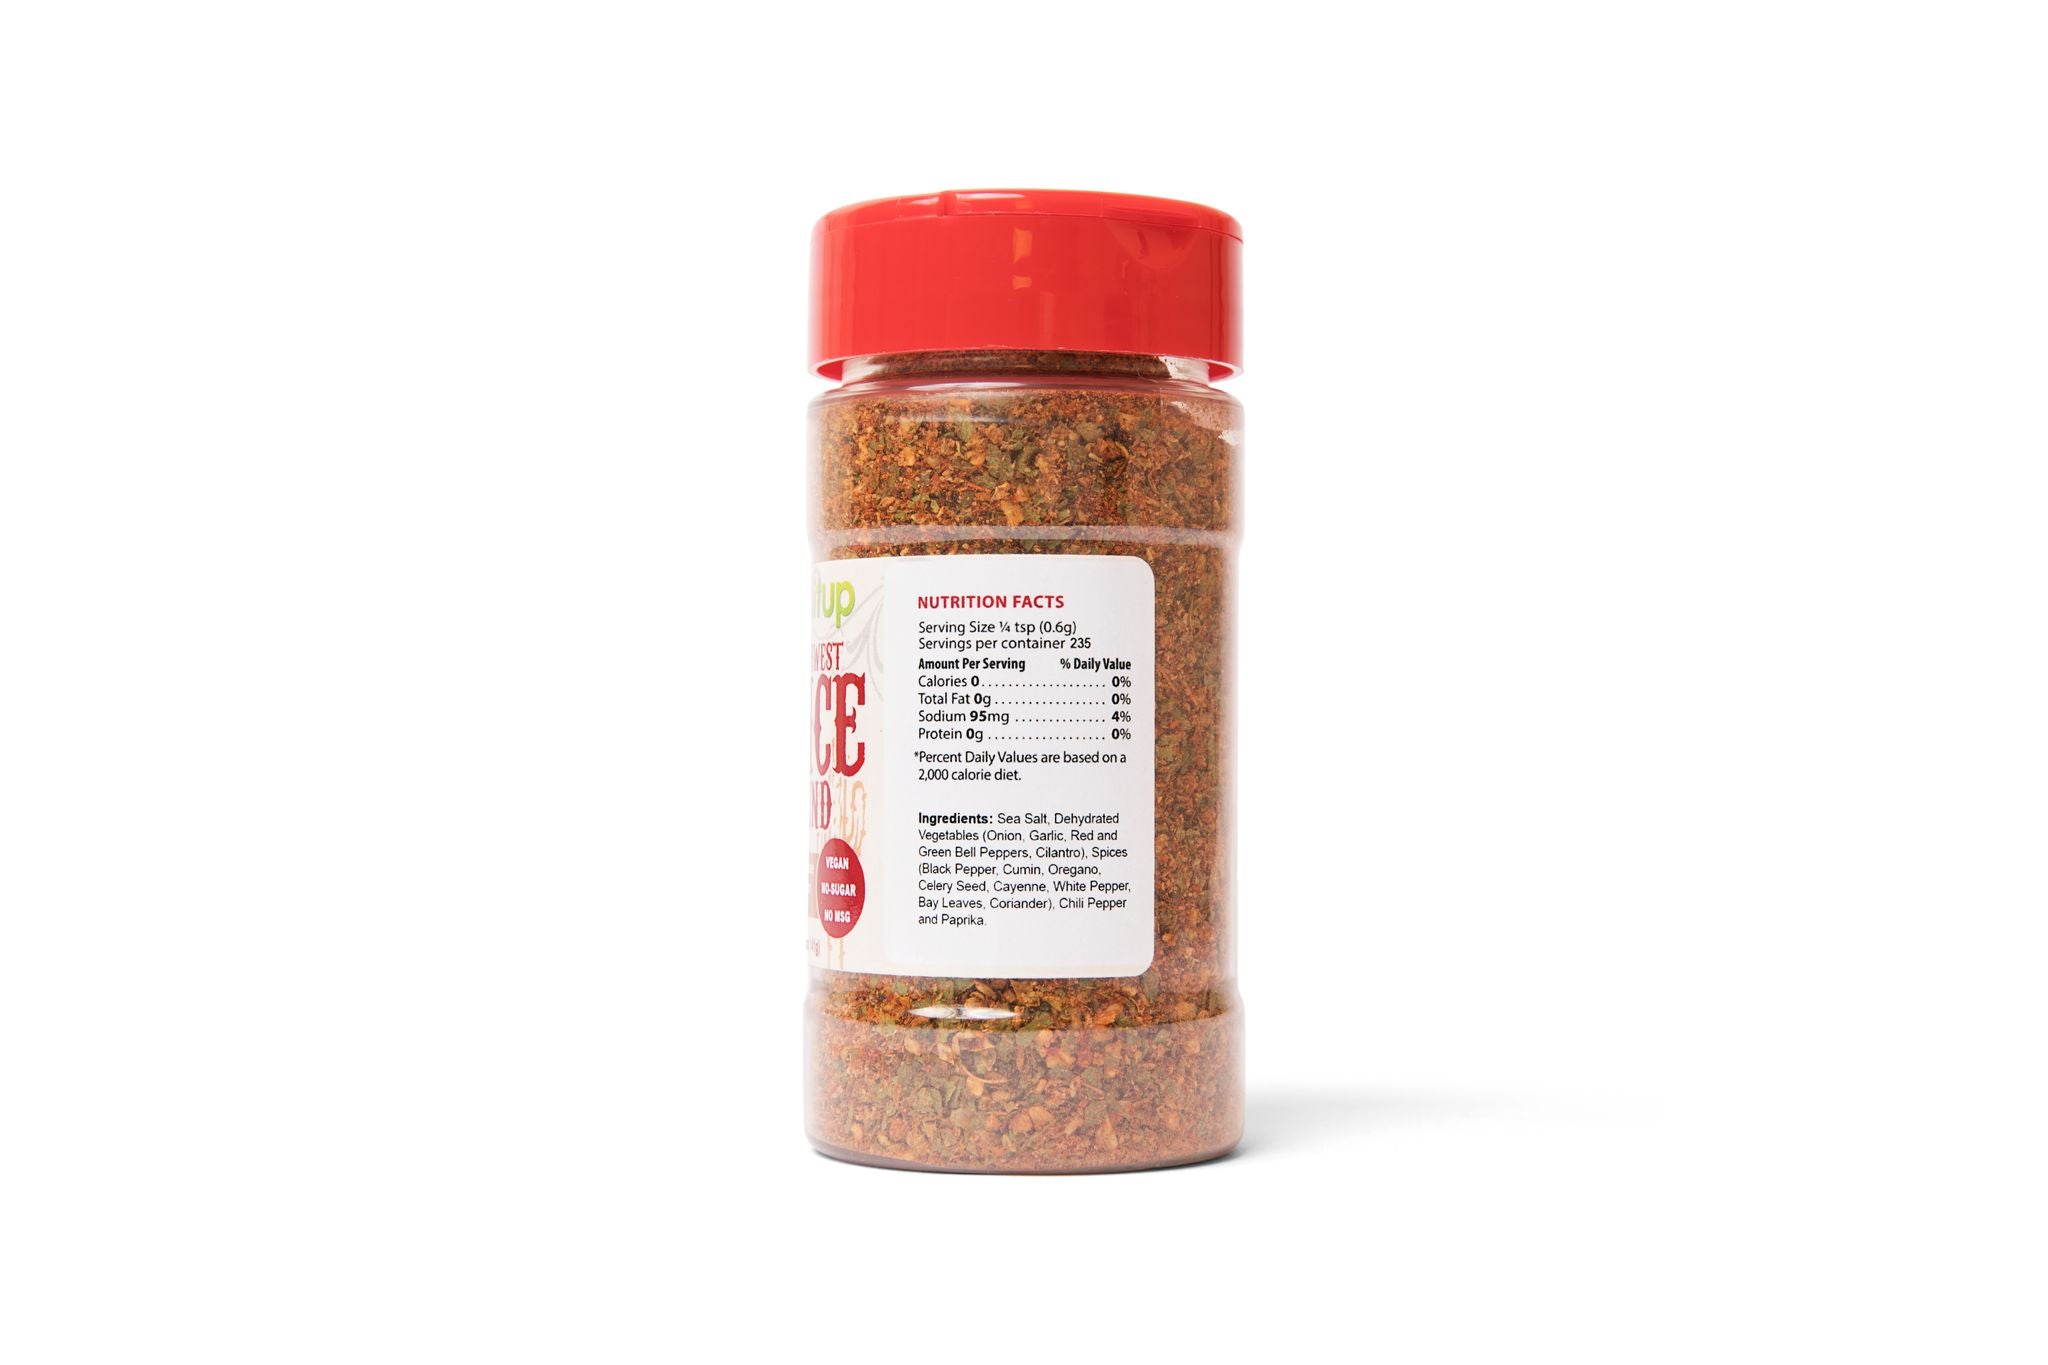 Southwest Spice Blend - The Girl on Bloor